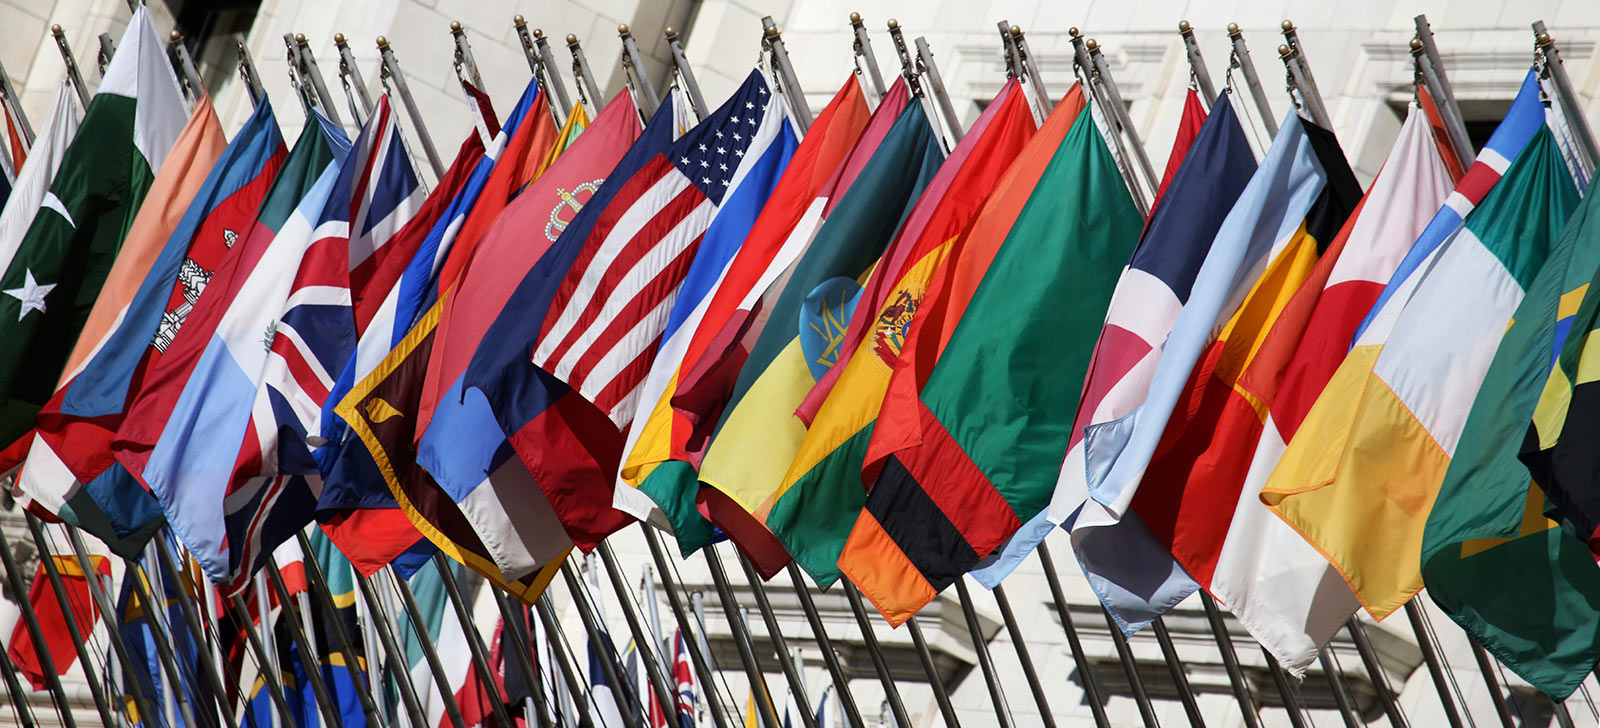 View of flags from different countries